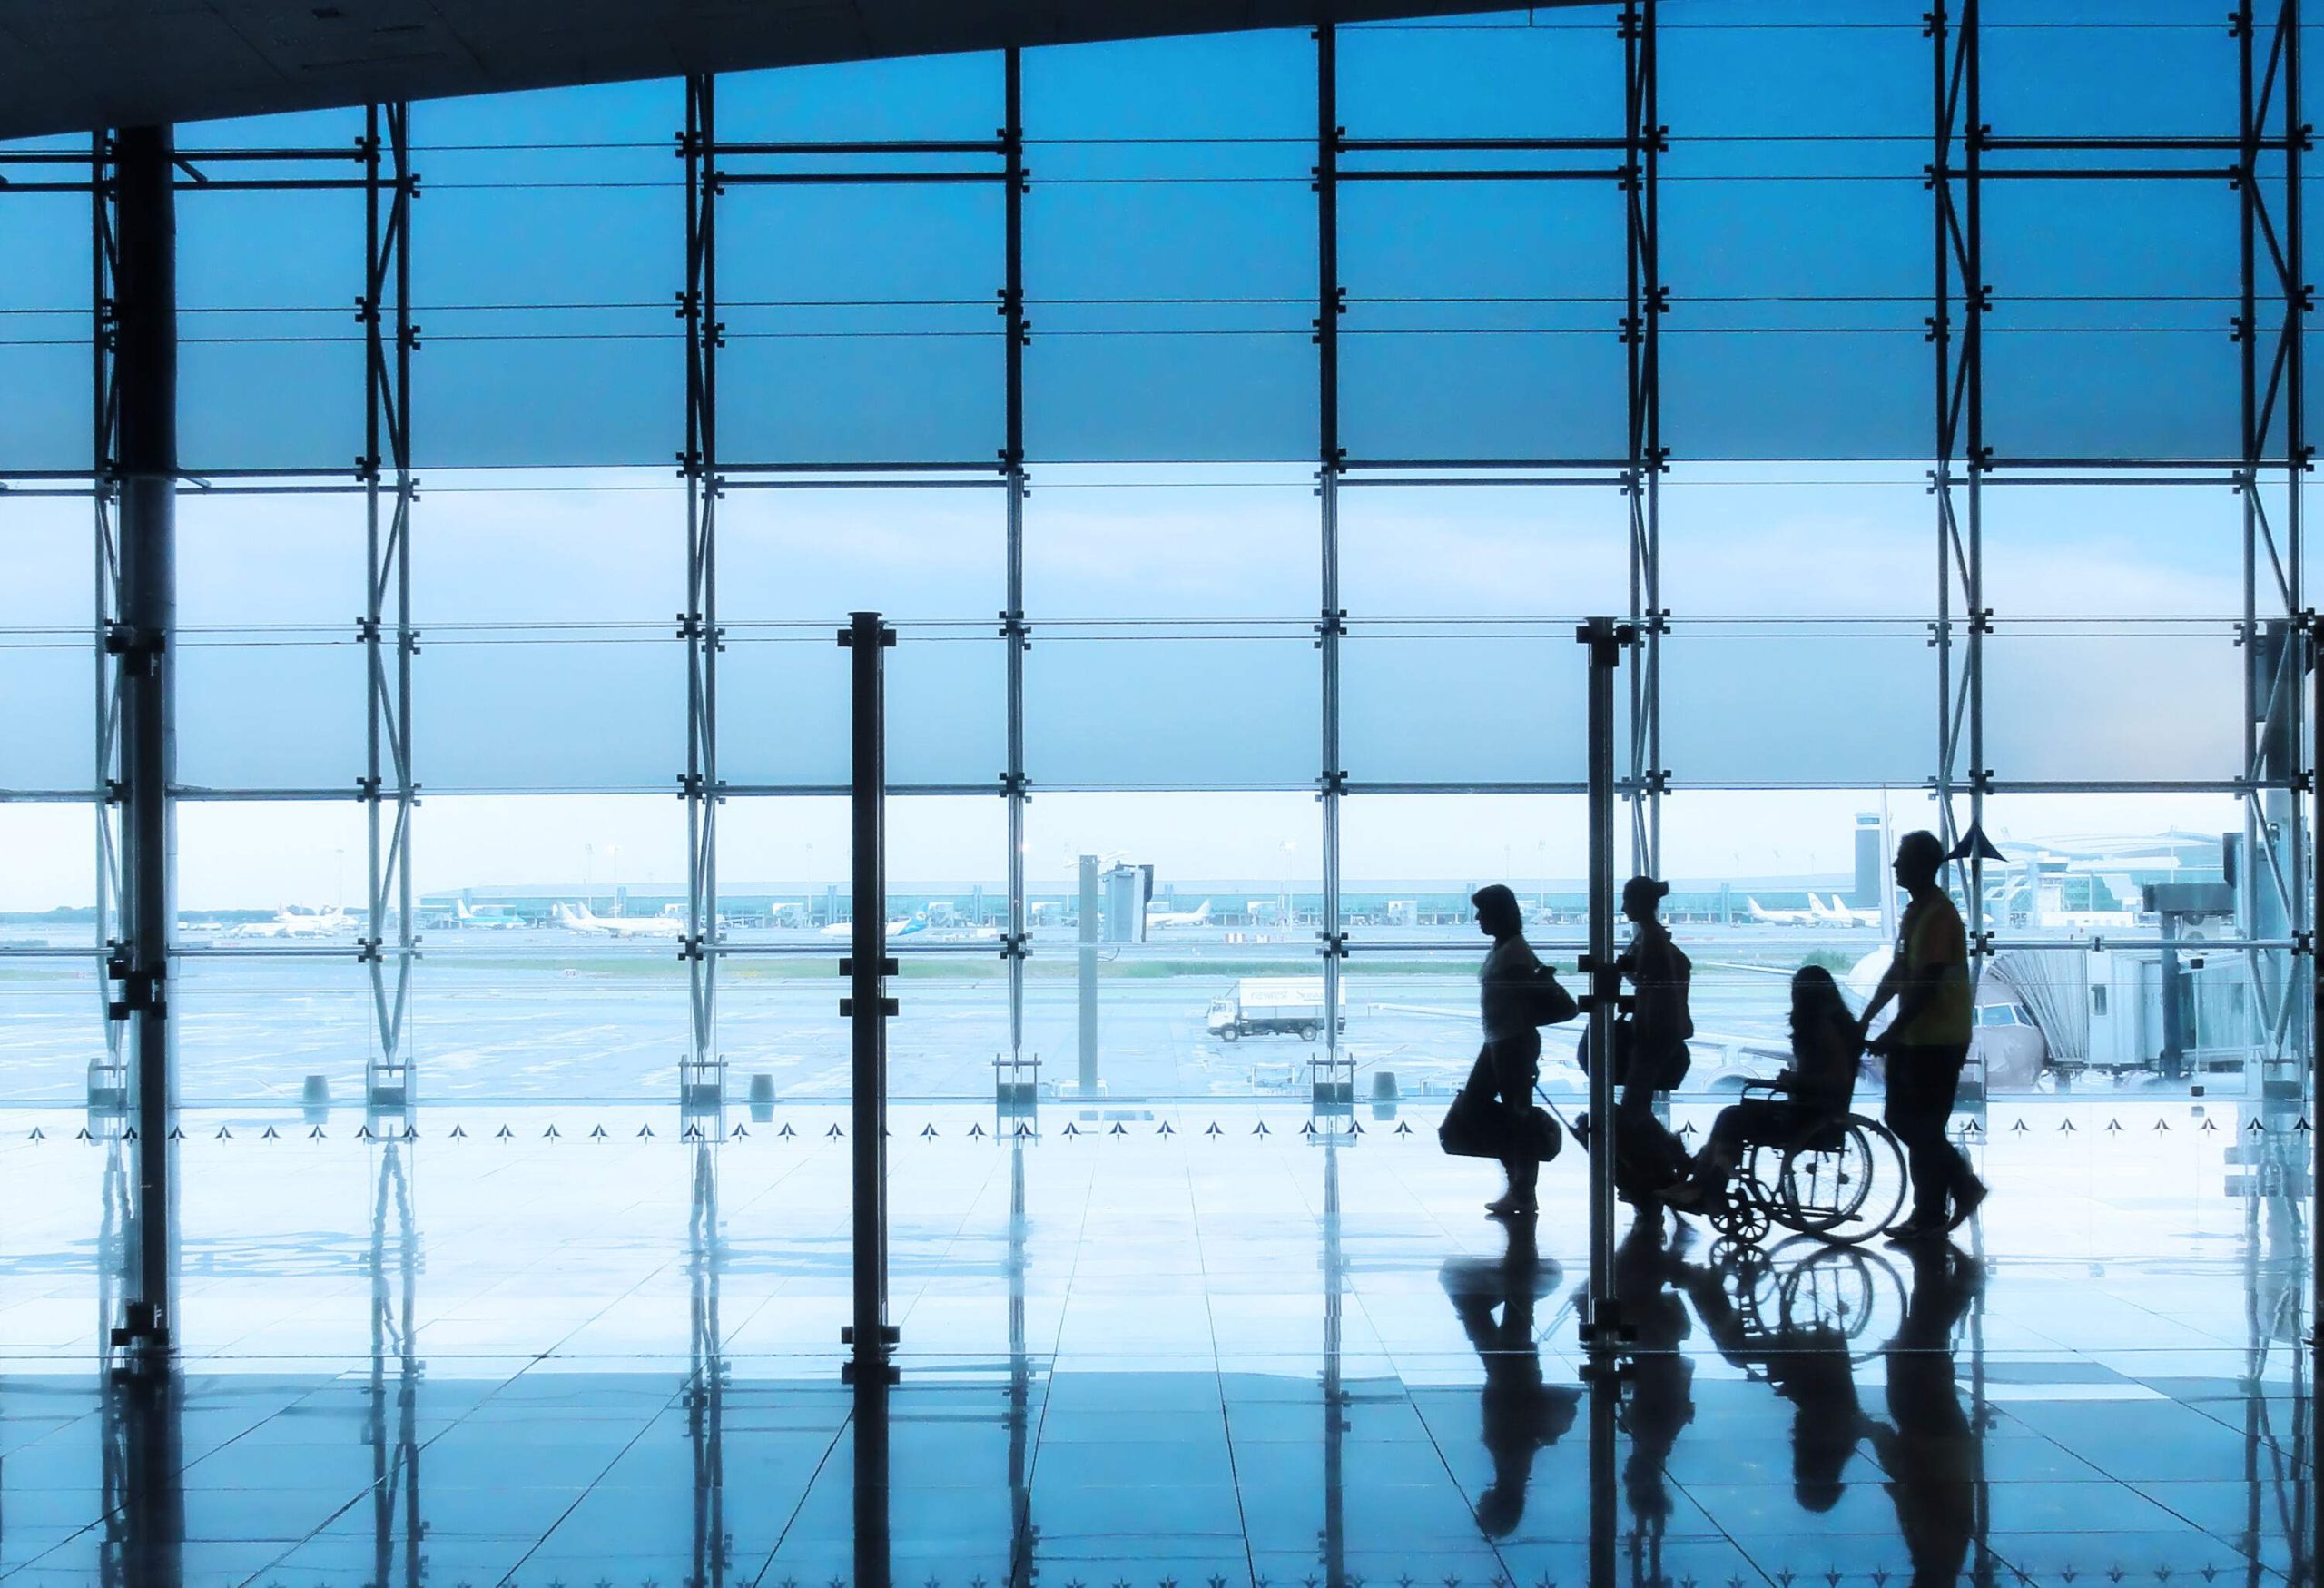 A silhouette of four people, one of them using a wheelchair, walking through the airport.